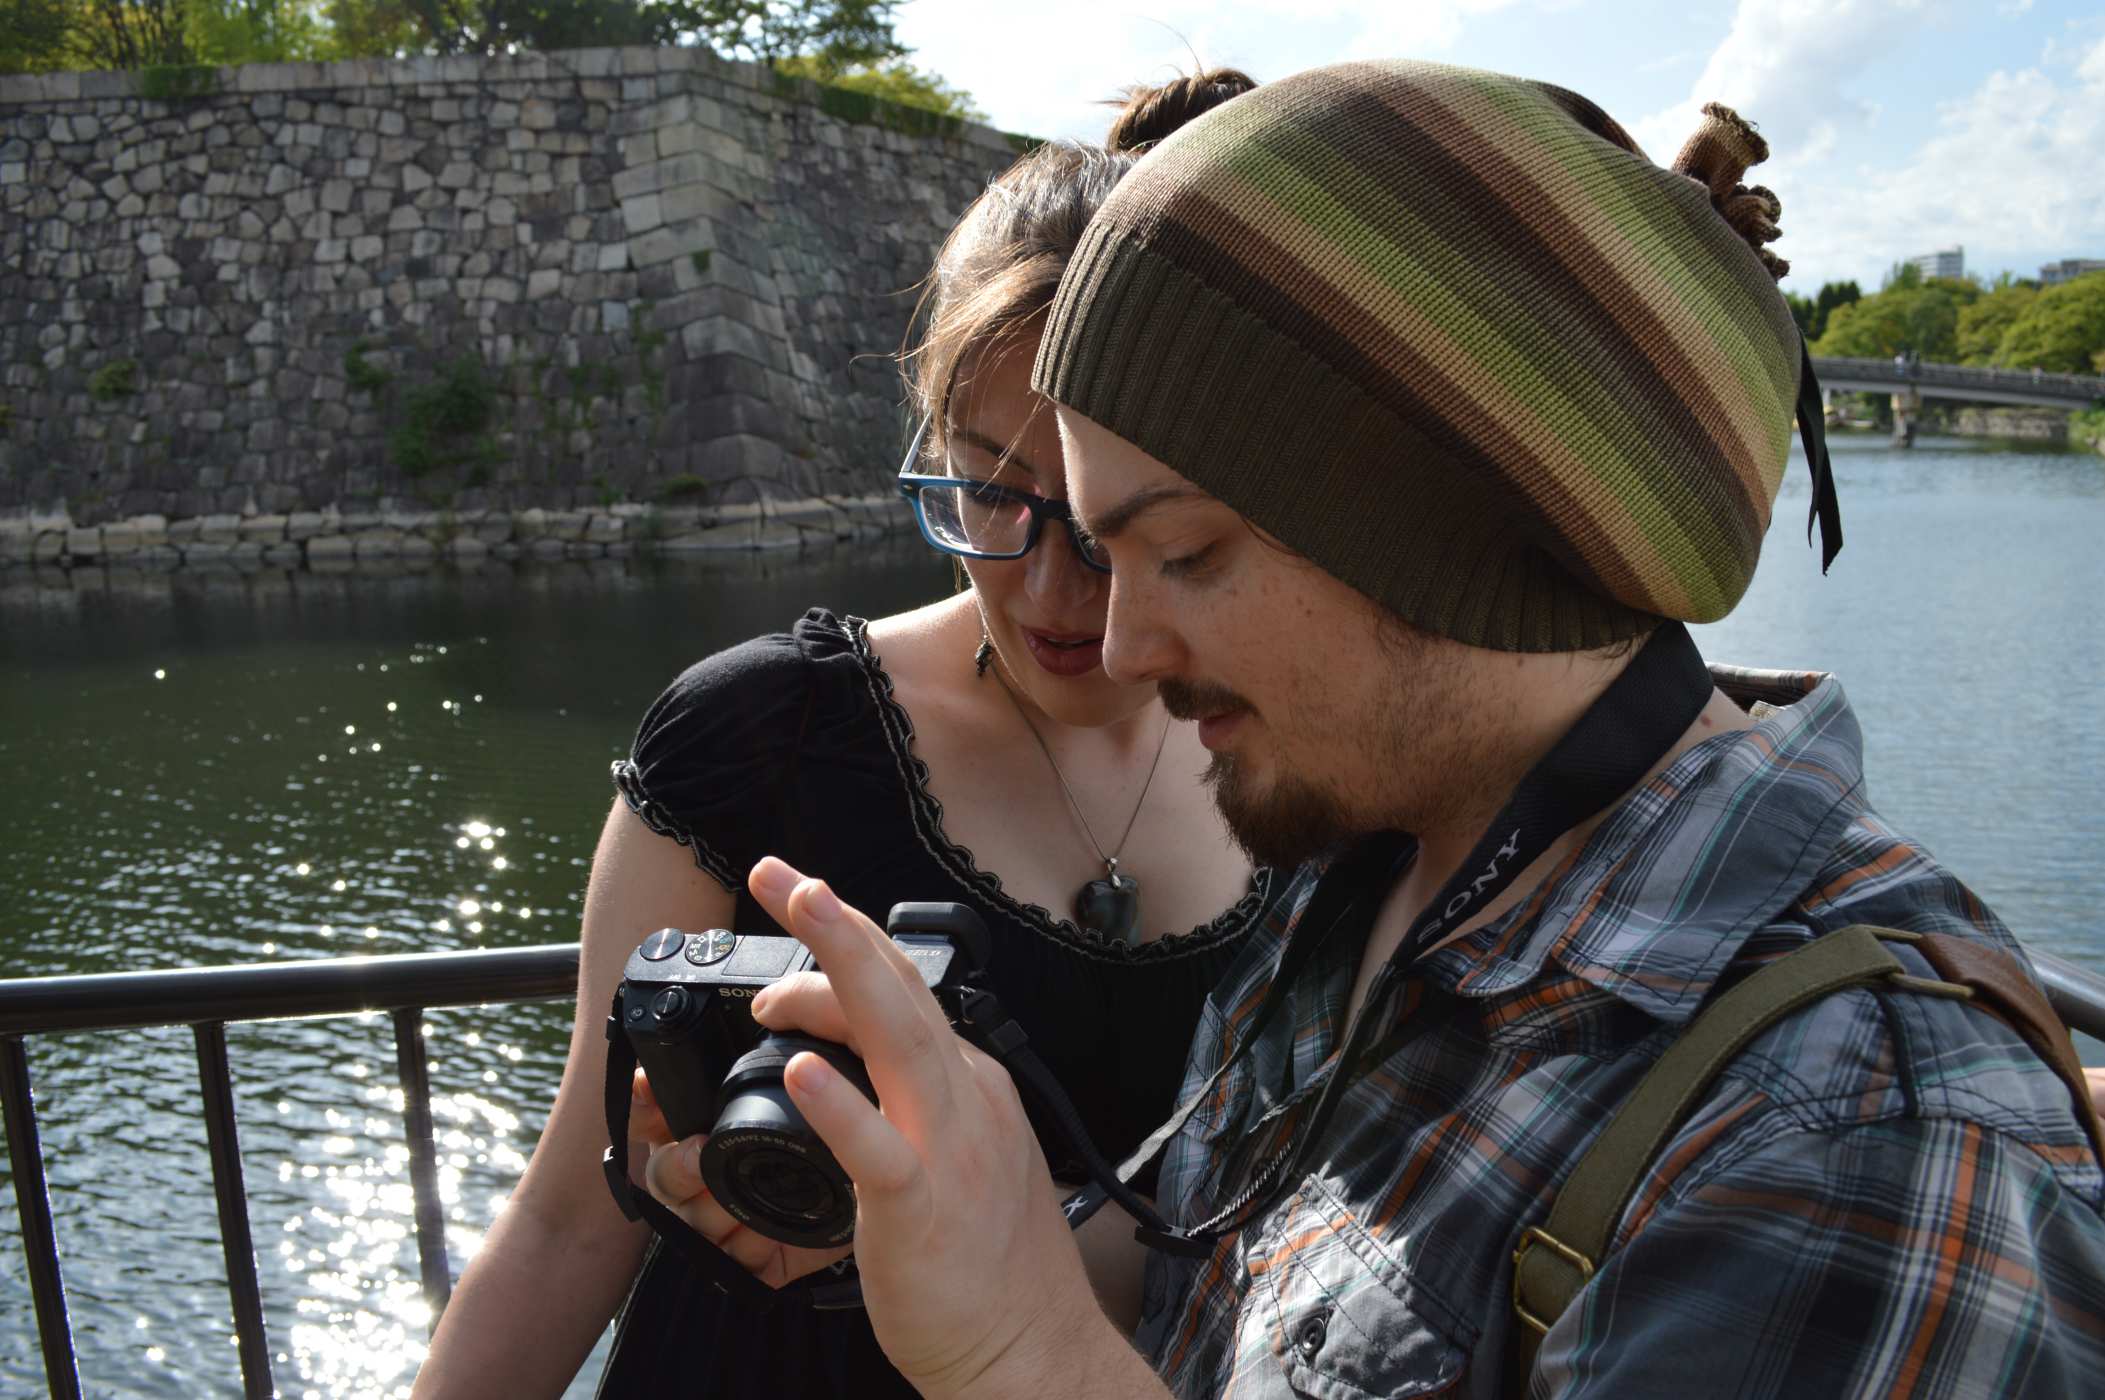 Checking out the pics at Osaka Castle